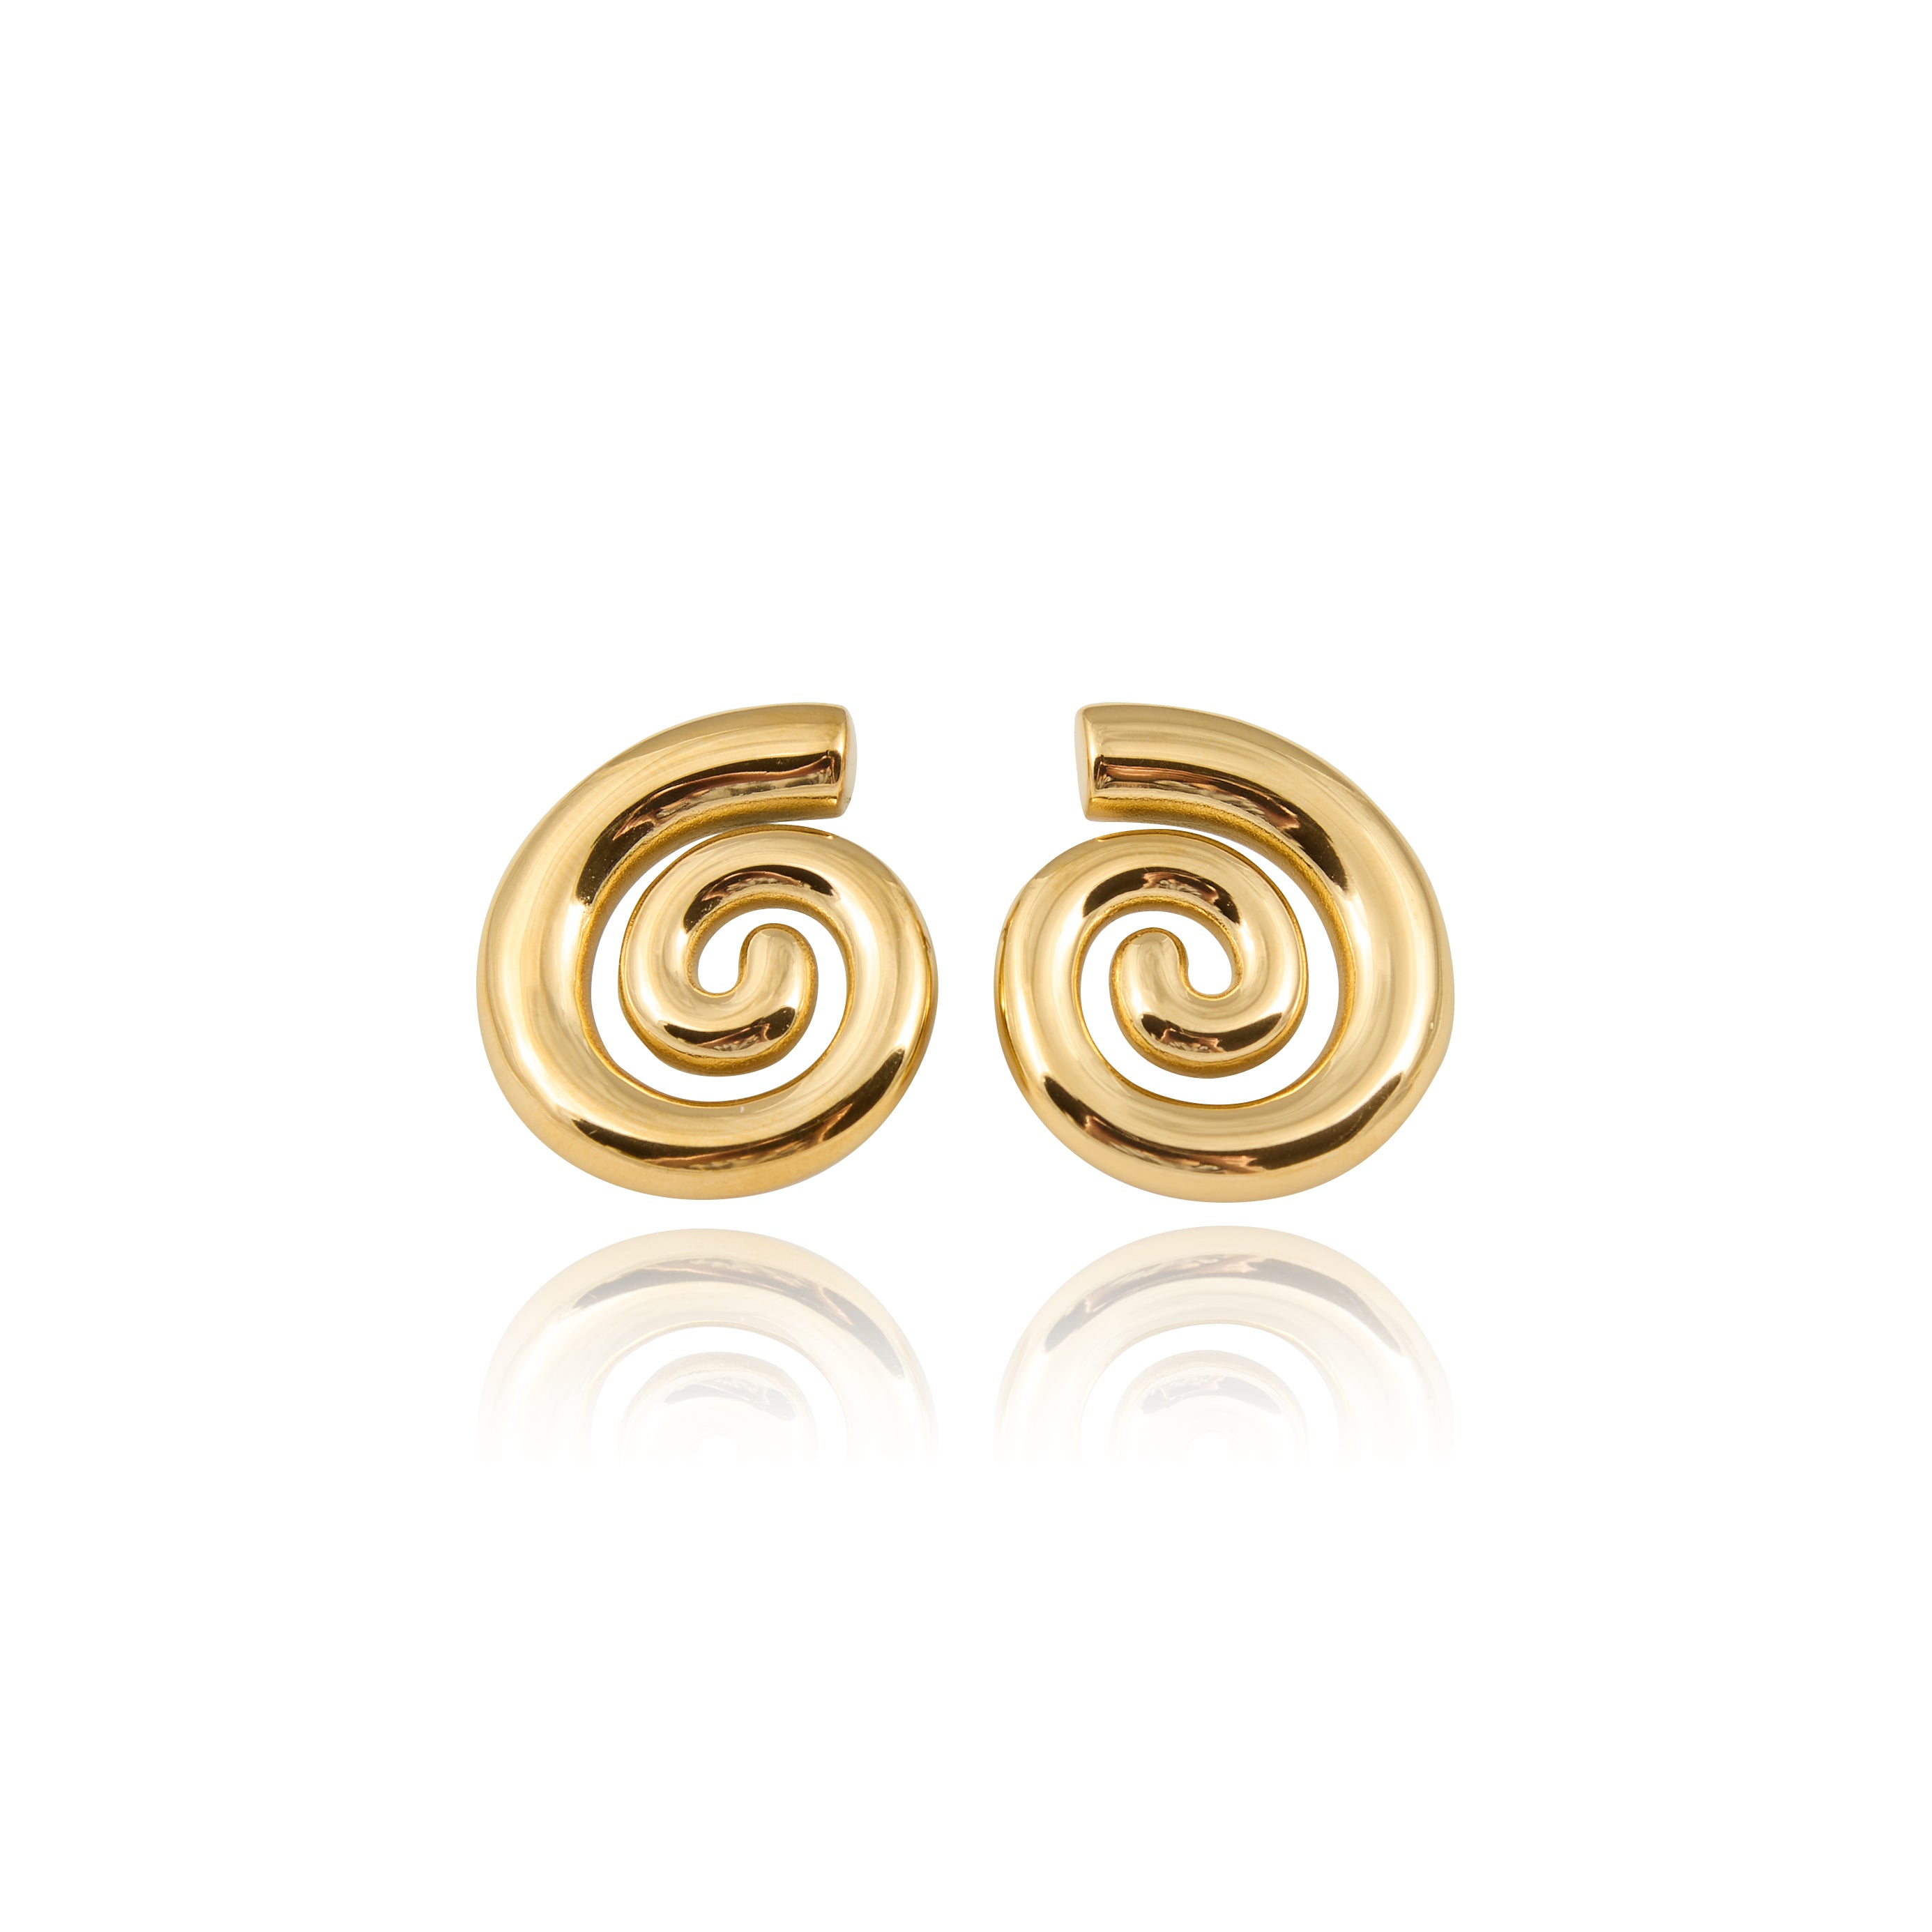 Elevate your ensemble with these statement pieces that effortlessly blend style and elegance. Embrace your individuality and let your style shine with our exceptional Unique Earrings.   18k gold plated on stainless steel. All the earrings come in a beautiful jewelry pouch.